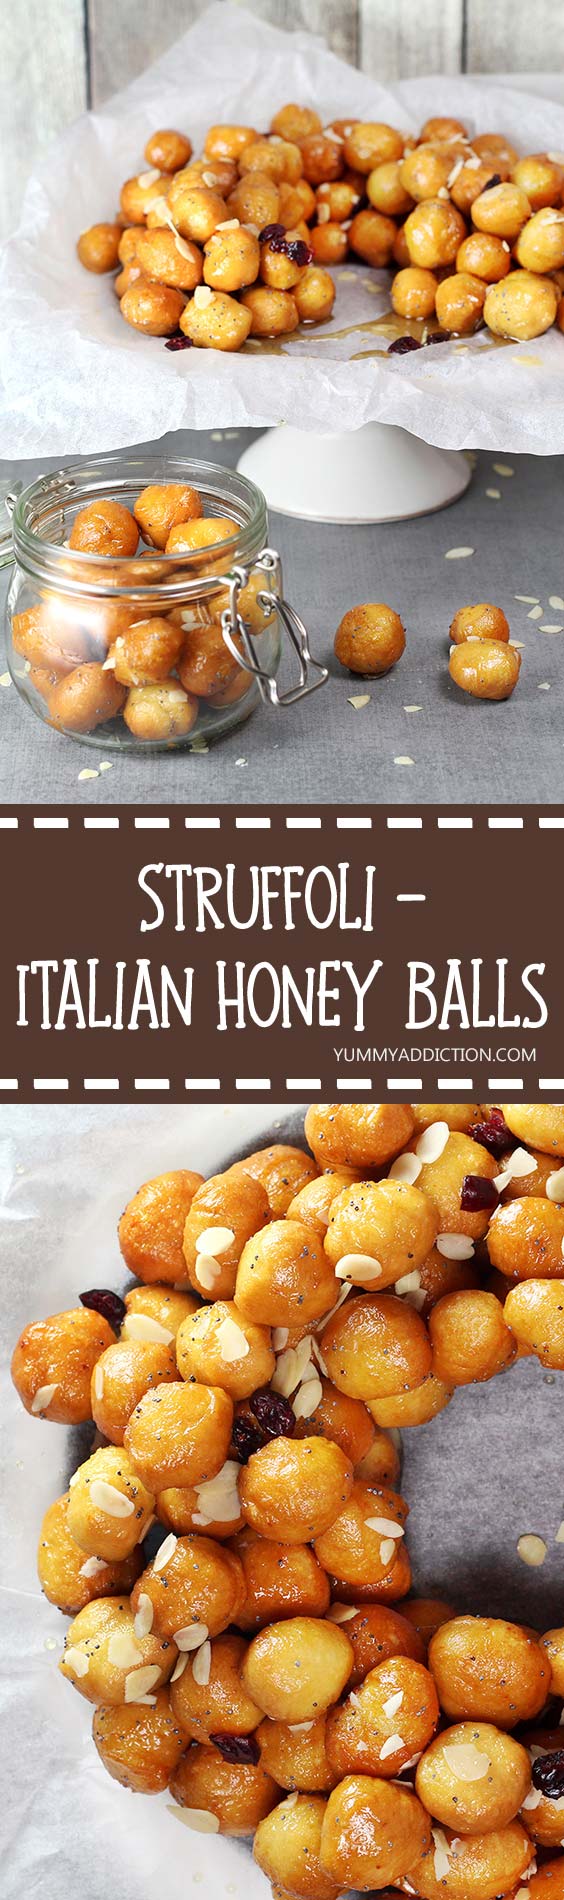 These Italian Honey Balls (Struffoli) are usually served on Christmas and other holidays. They are crunchy on the outside, soft and warm inside. Perfection! | yummyaddiction.com